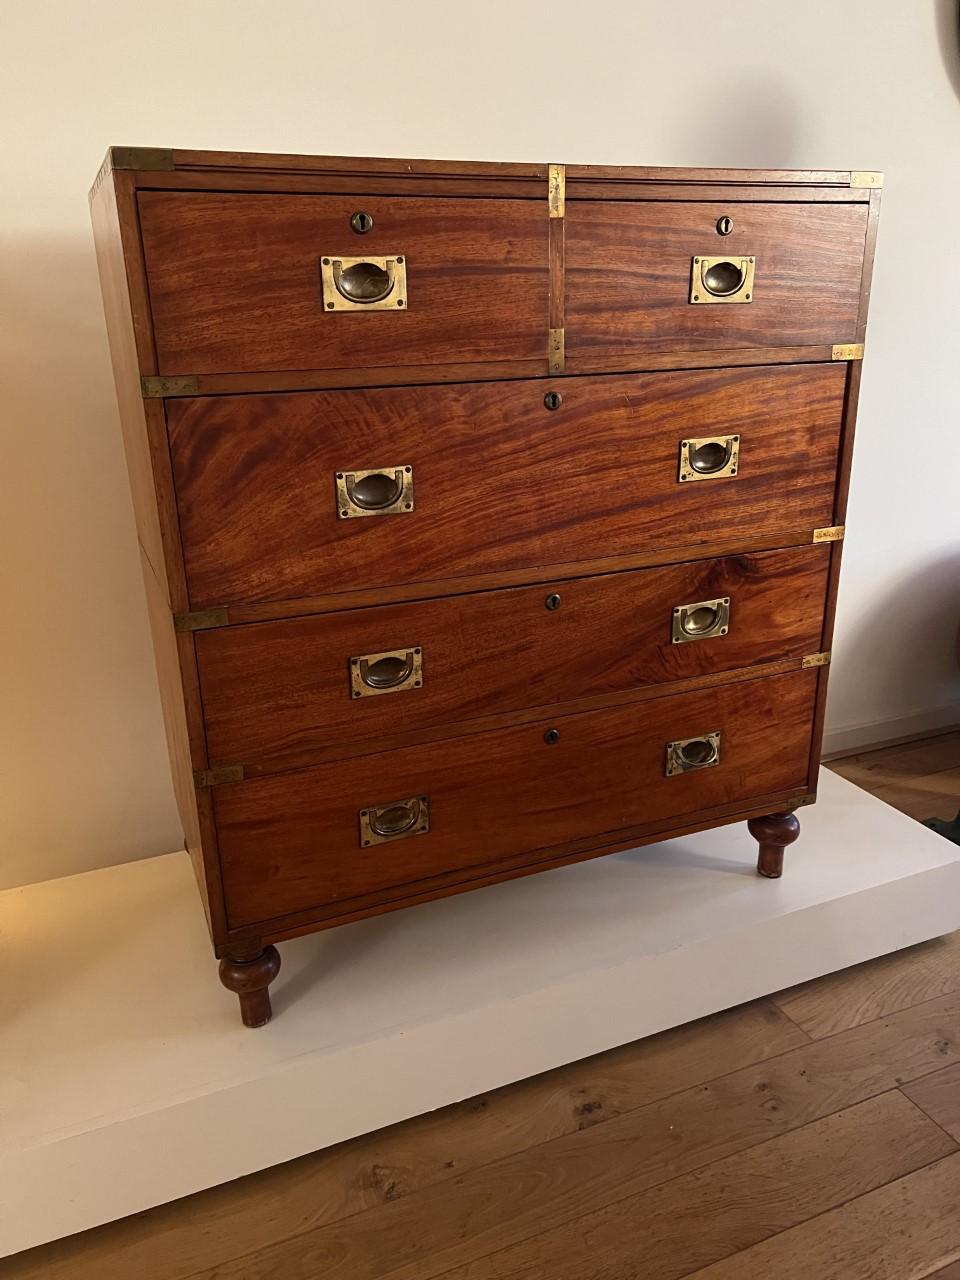 Mahogant & brass campaign chest or officers chest that was used by British officers to store their personal belongings and clothing / uniforms.
Beause thes officers had to change location regularly these cabinest travelled a lot and therefore could